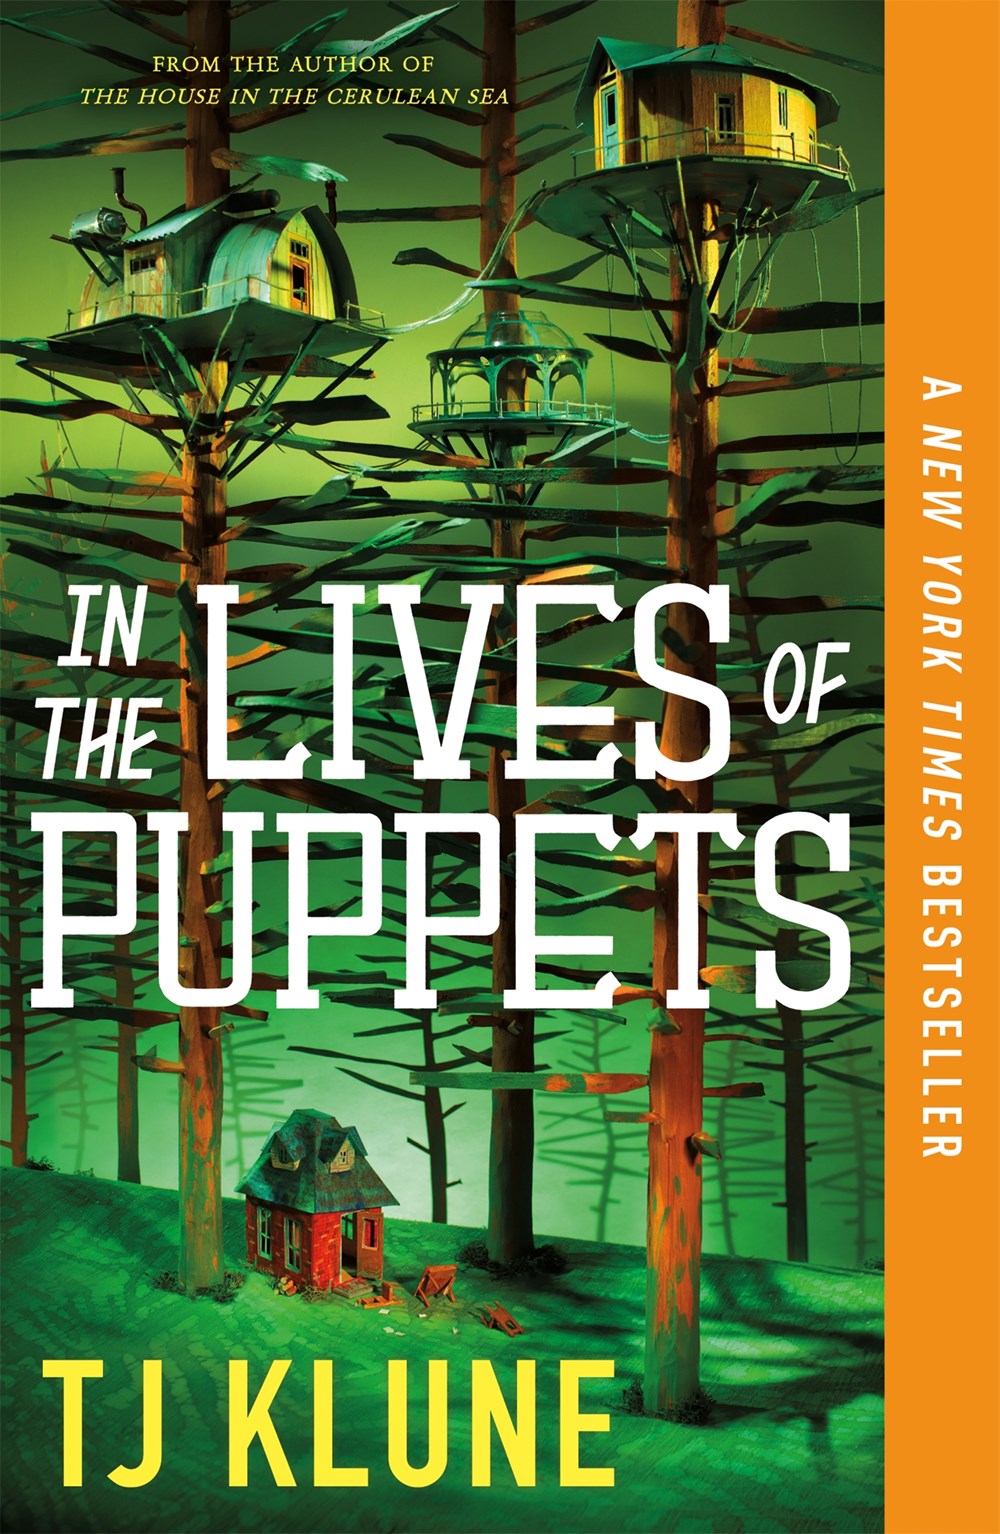 In the Lives of Puppets - TJ Klune – Books Around the Corner